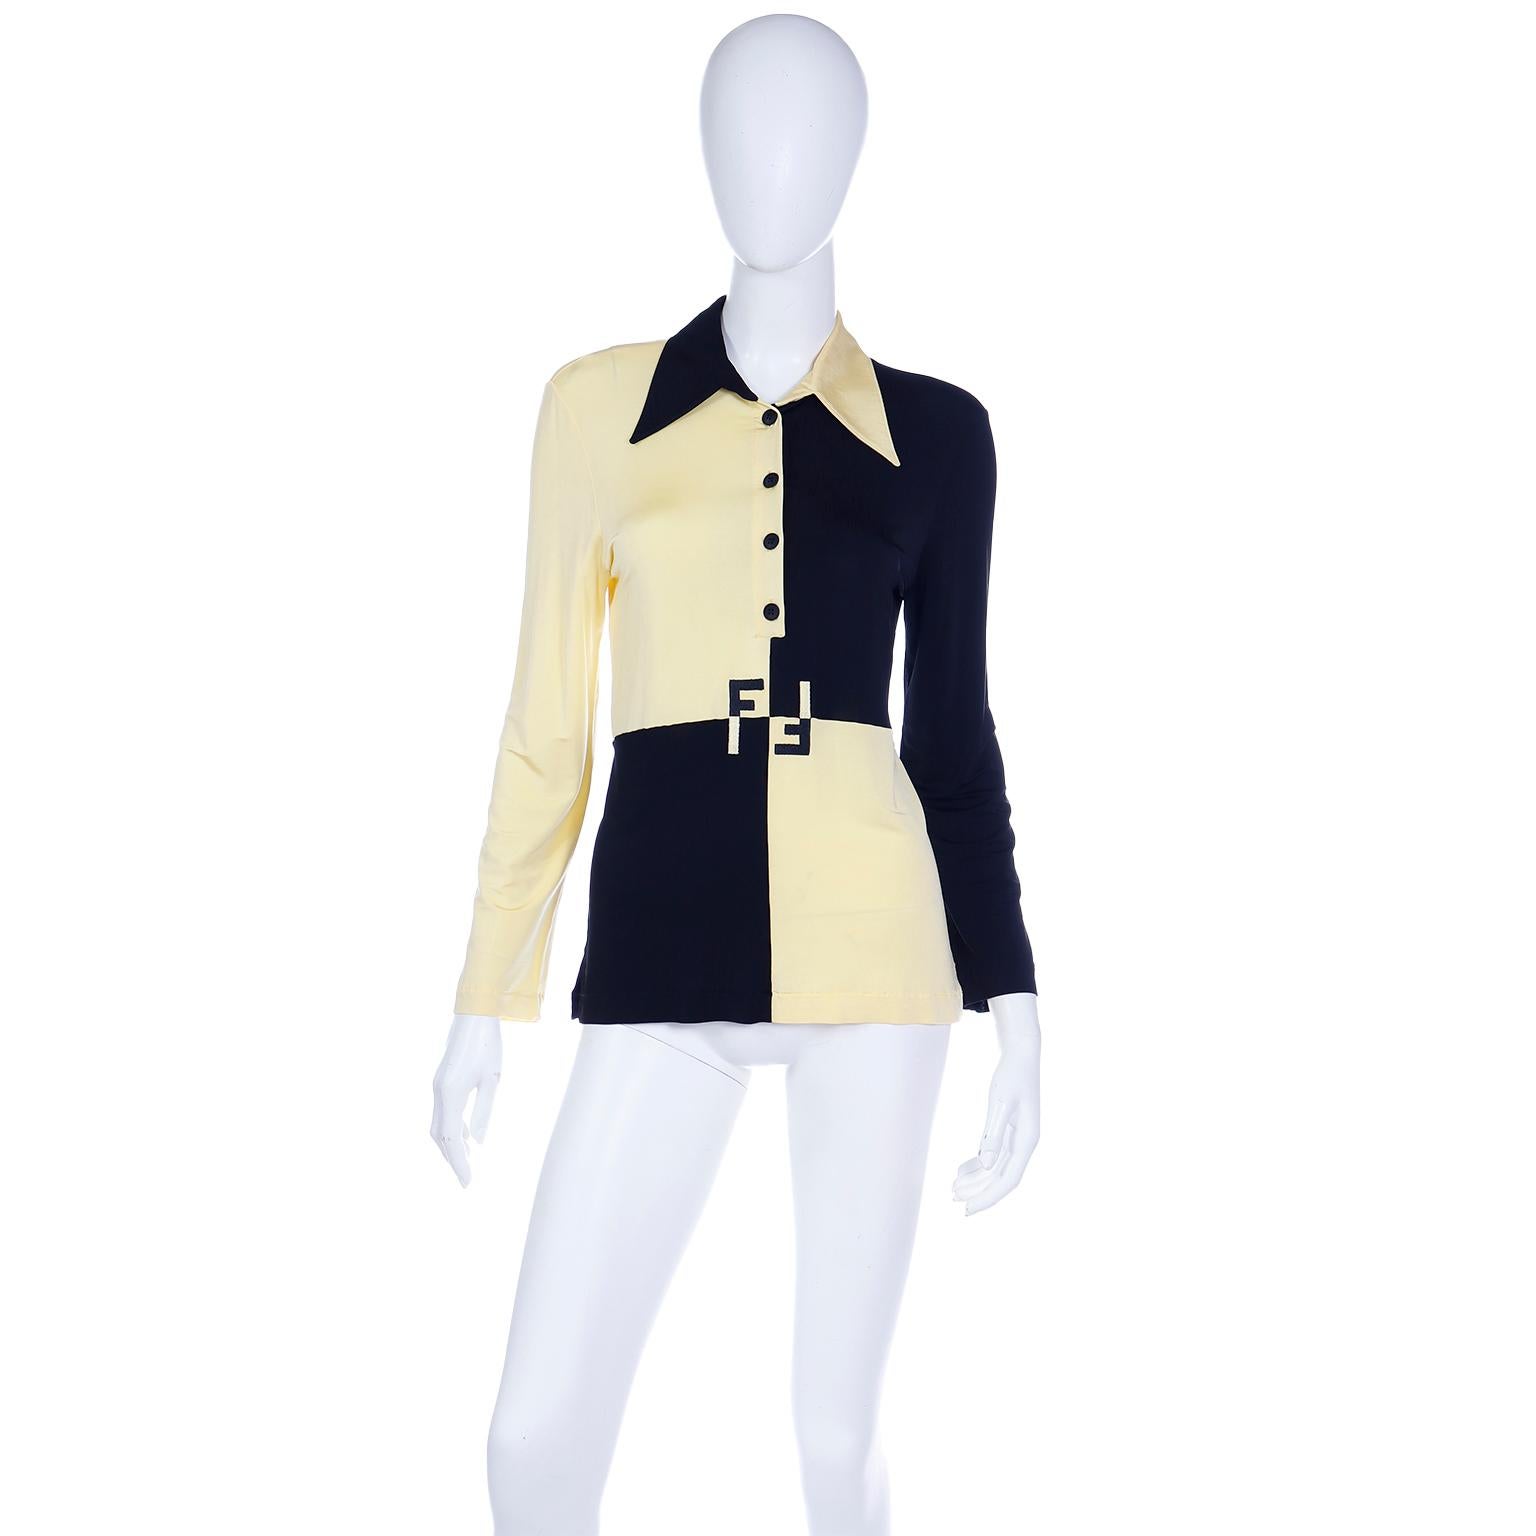 This vintage 1990's Fendi shirt is a fantastic addition to any wardrobe that could use a pop of color! With the playful contrast of its butter yellow and black color block design, it is so uniquely elegant! The shirt features long sleeves, a pointed